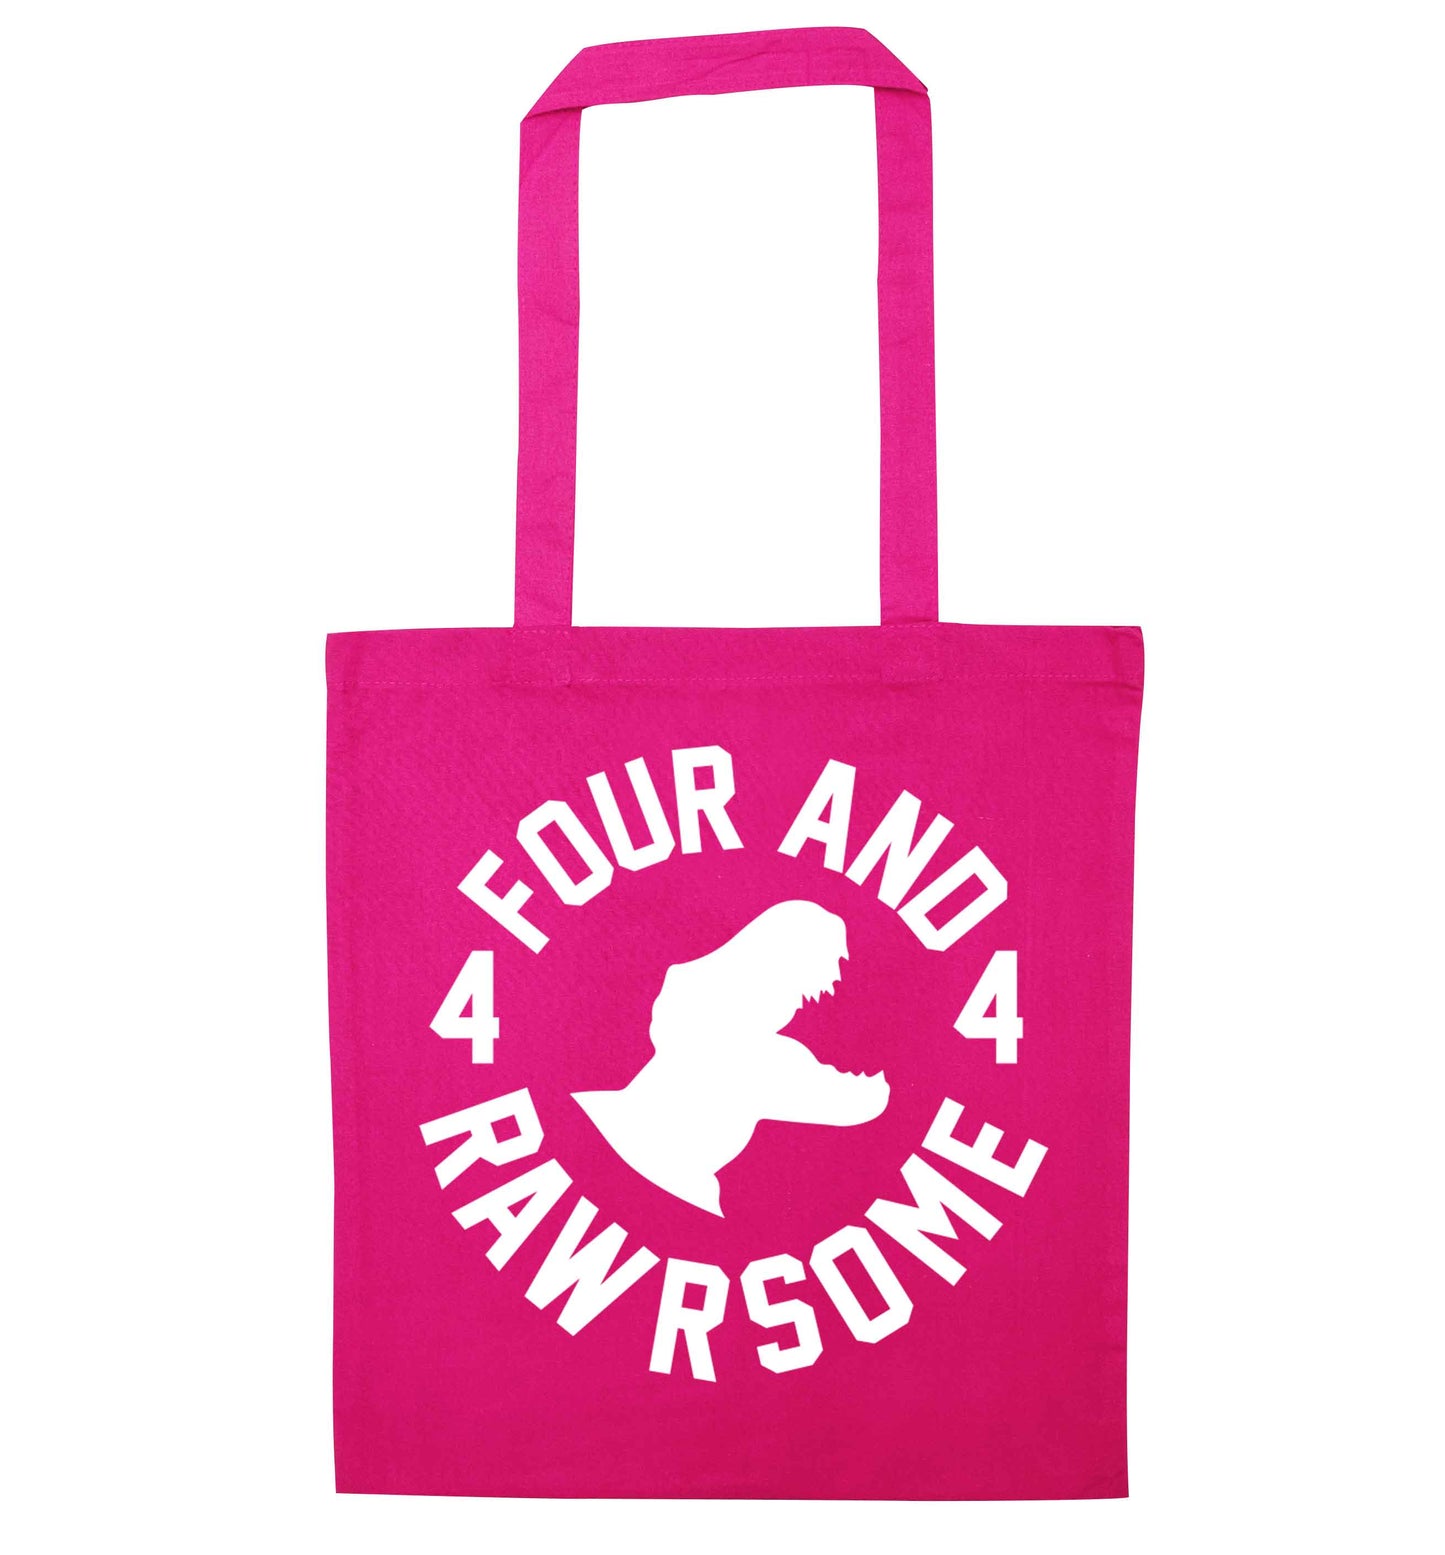 Four and rawrsome pink tote bag